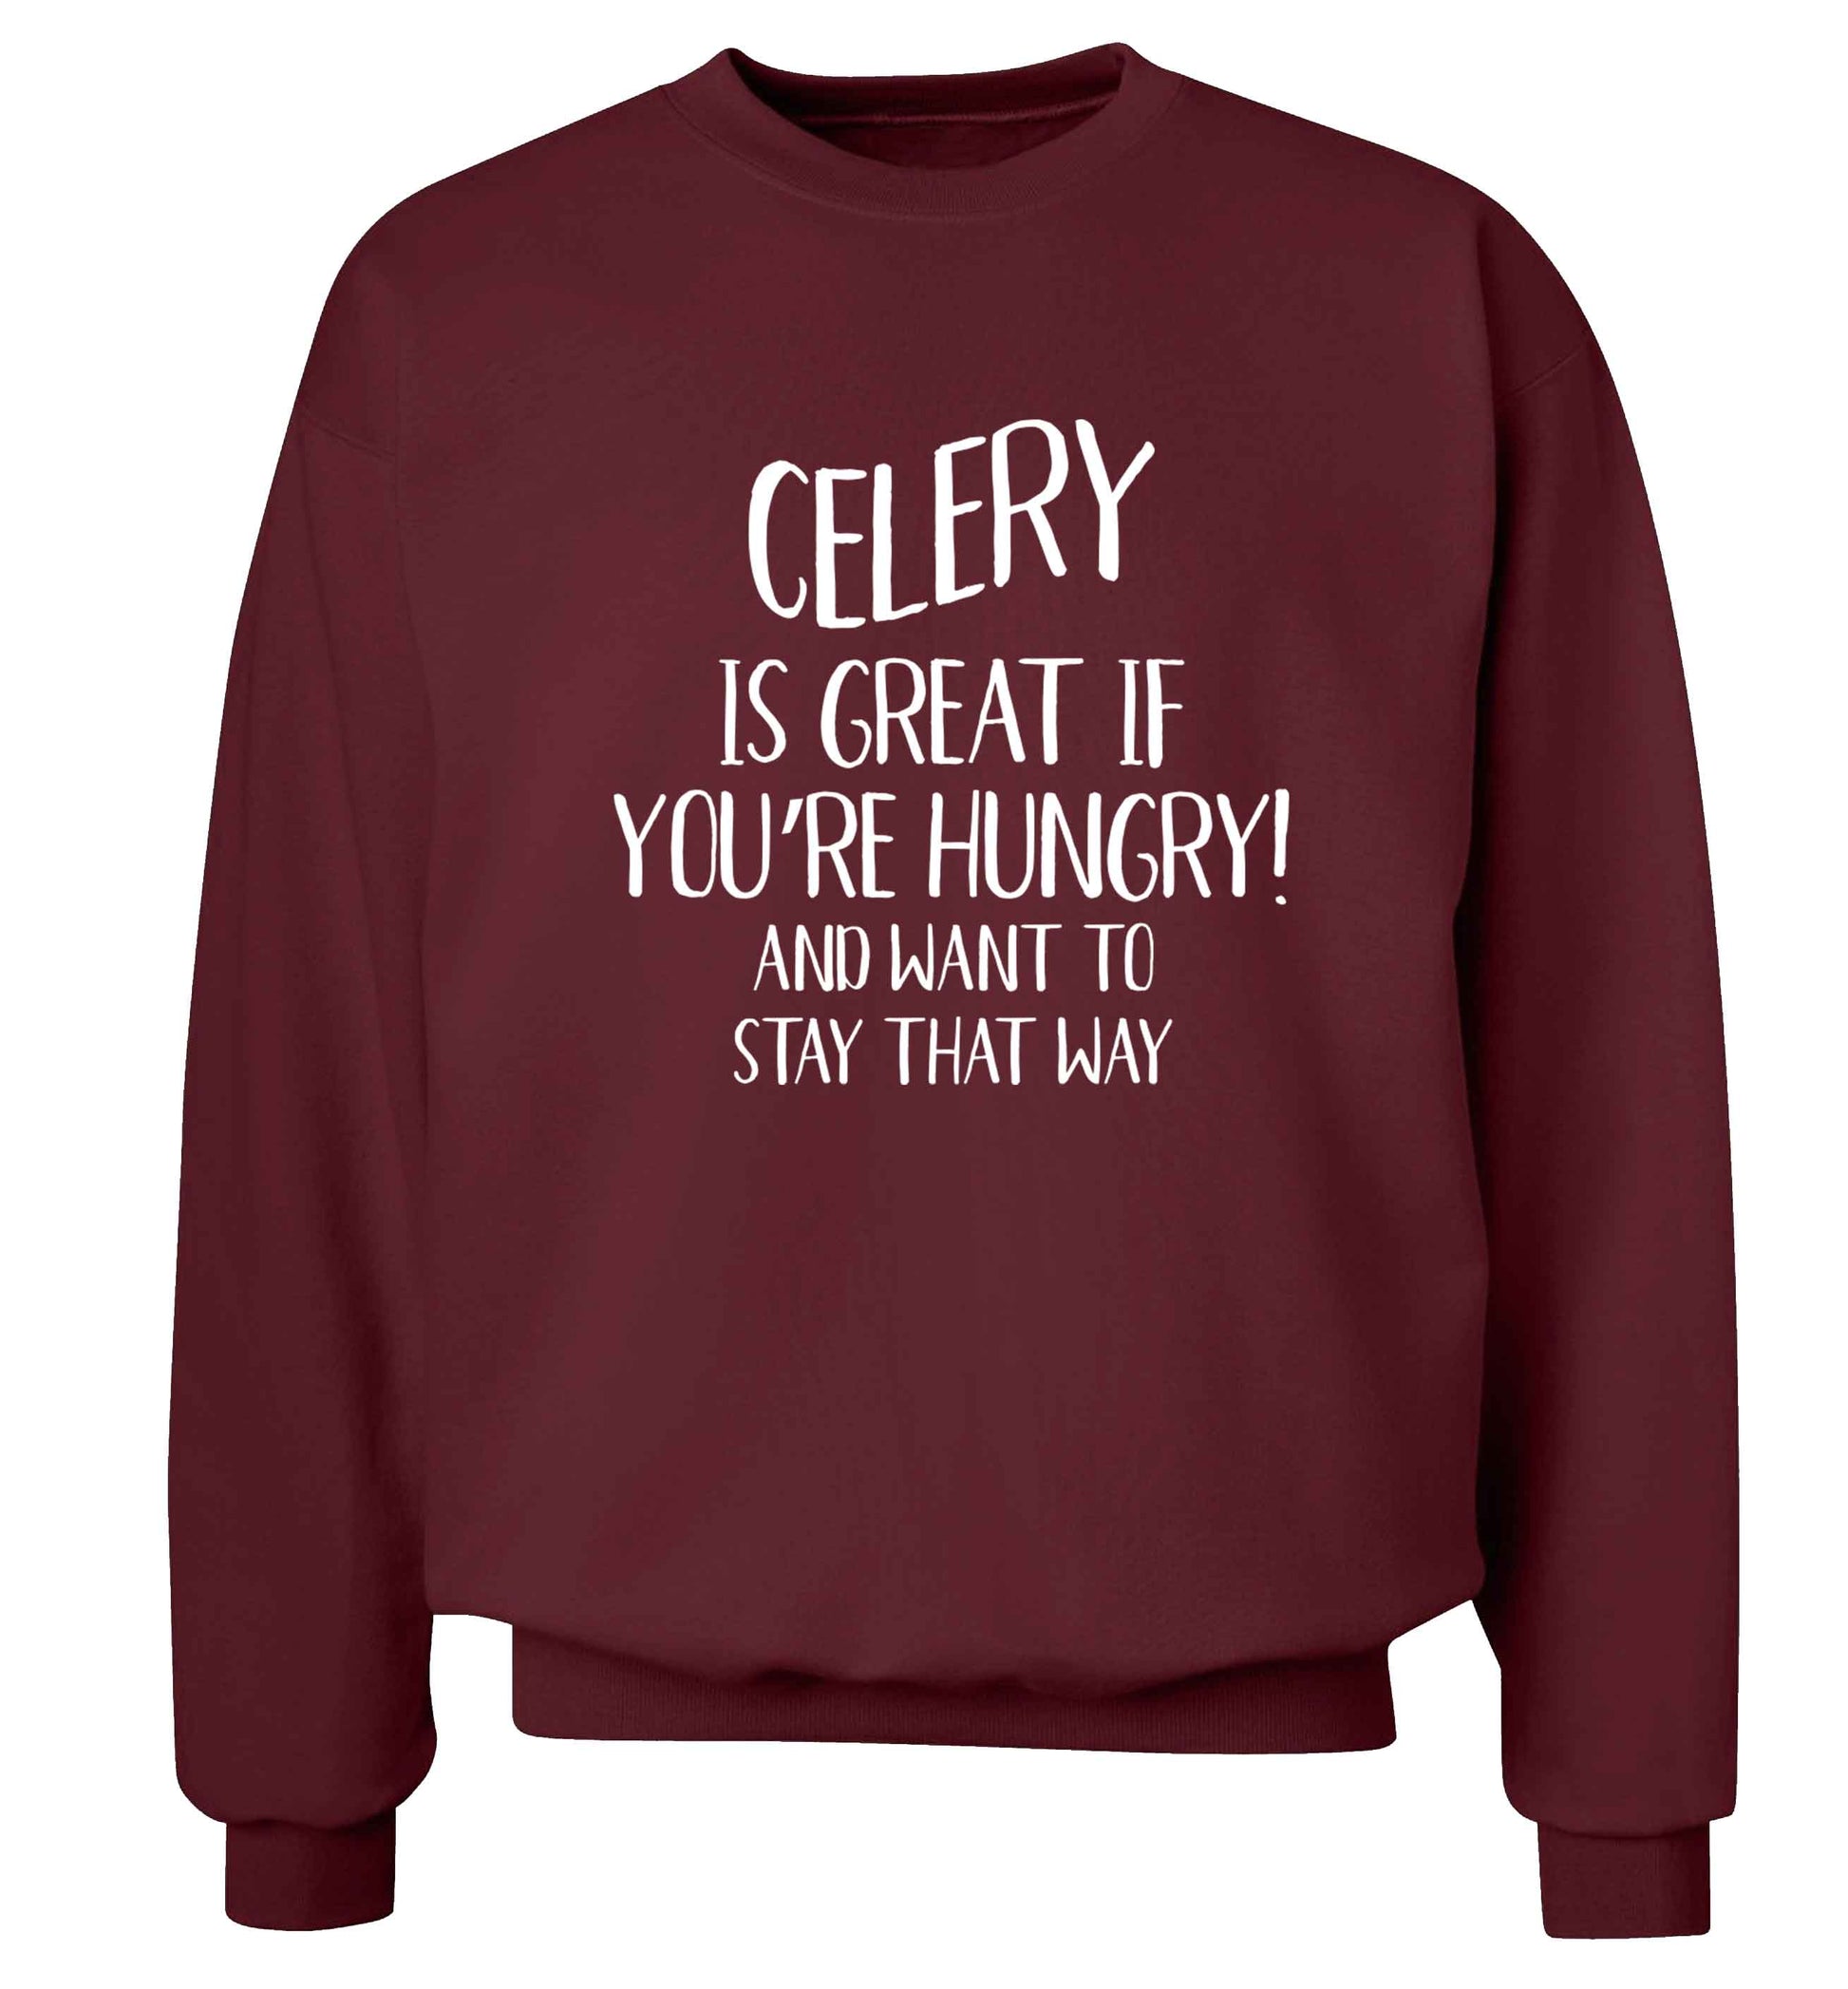 Cellery is great when you're hungry and want to stay that way Adult's unisex maroon Sweater 2XL